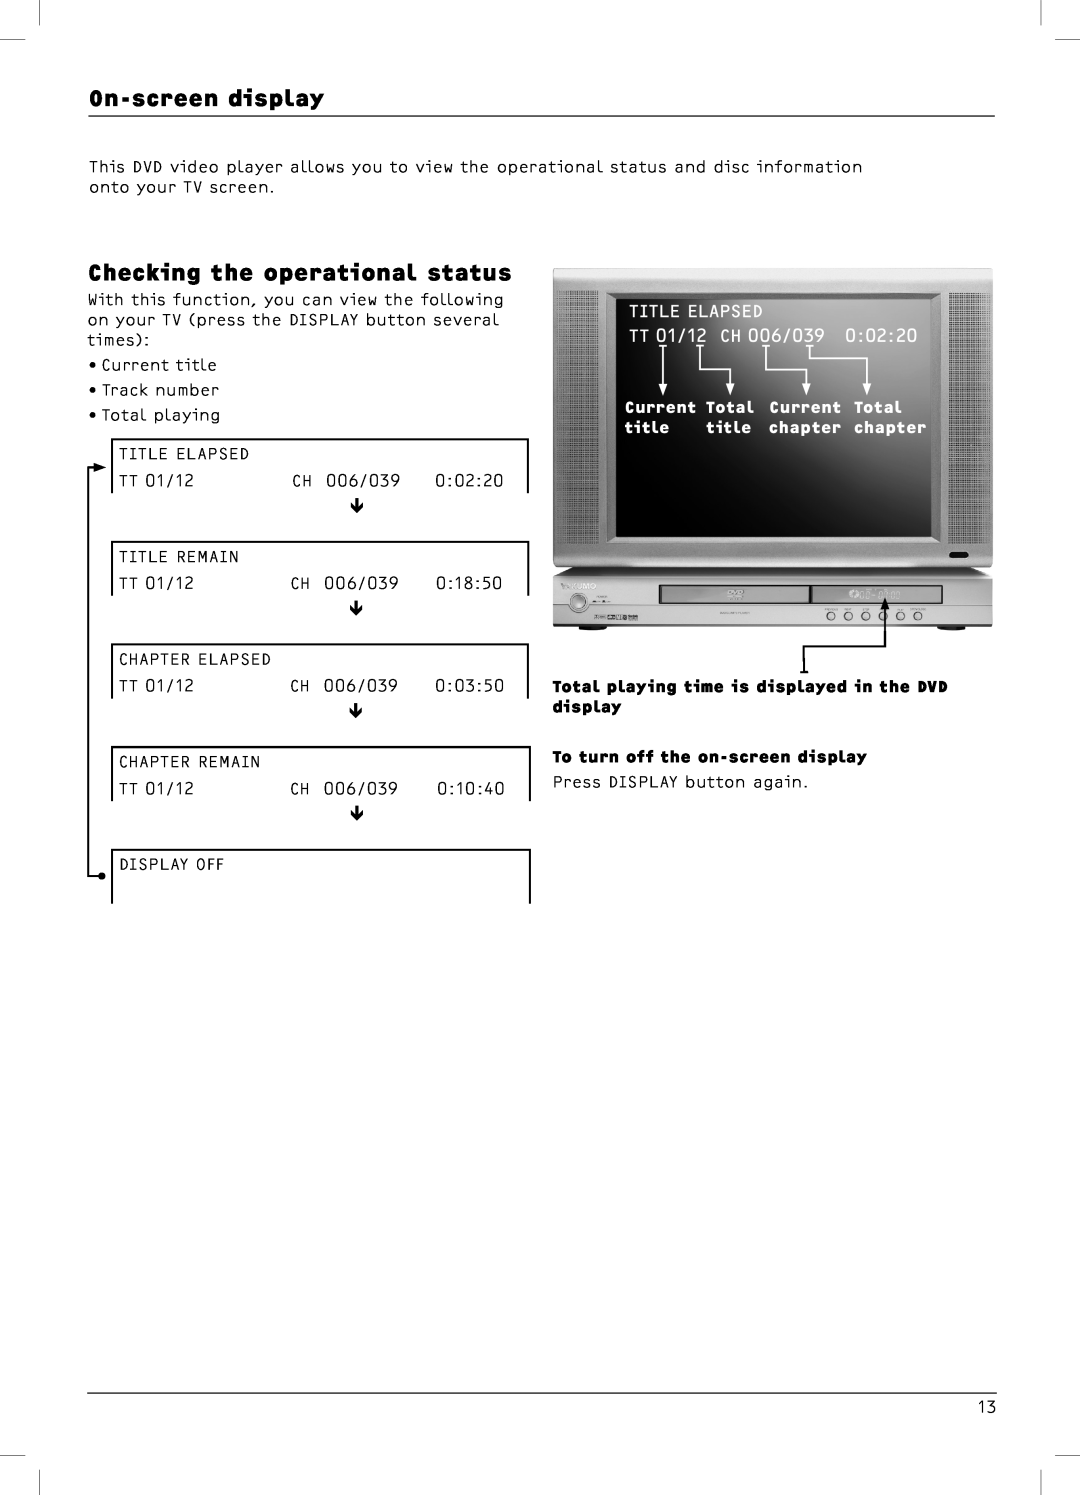 Dolby Laboratories DX4 On-screen display, Checking the operational status, TITLE ELAPSED TT 01/12 CH 006/039, Current 